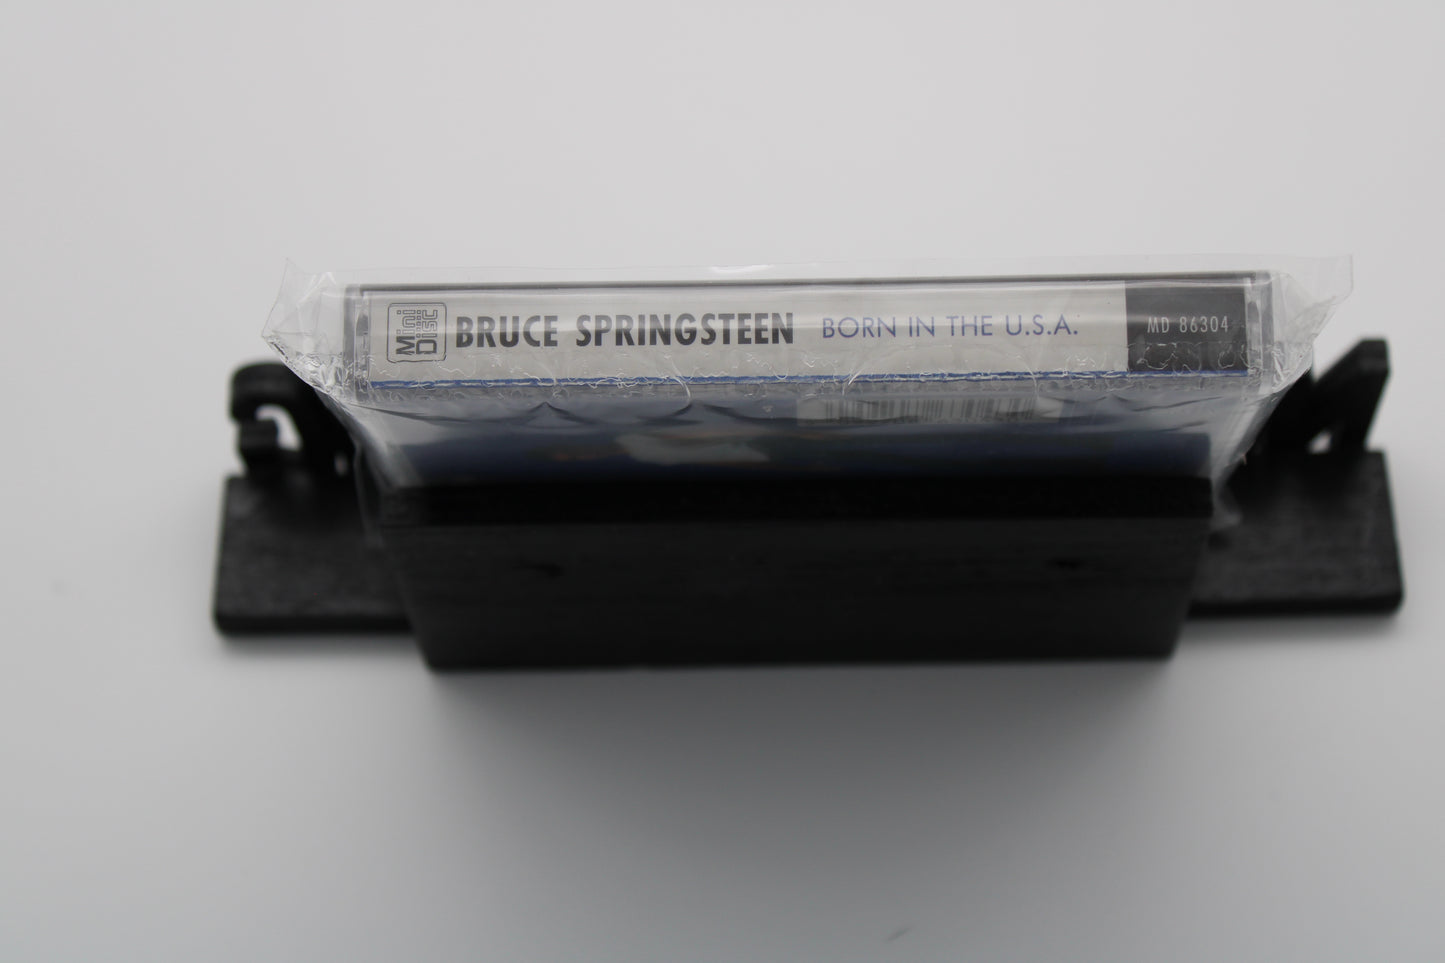 Bruce Springsteen SEALED Born In The USA Original MiniDisc - Very Rare Limited Production and Sealed